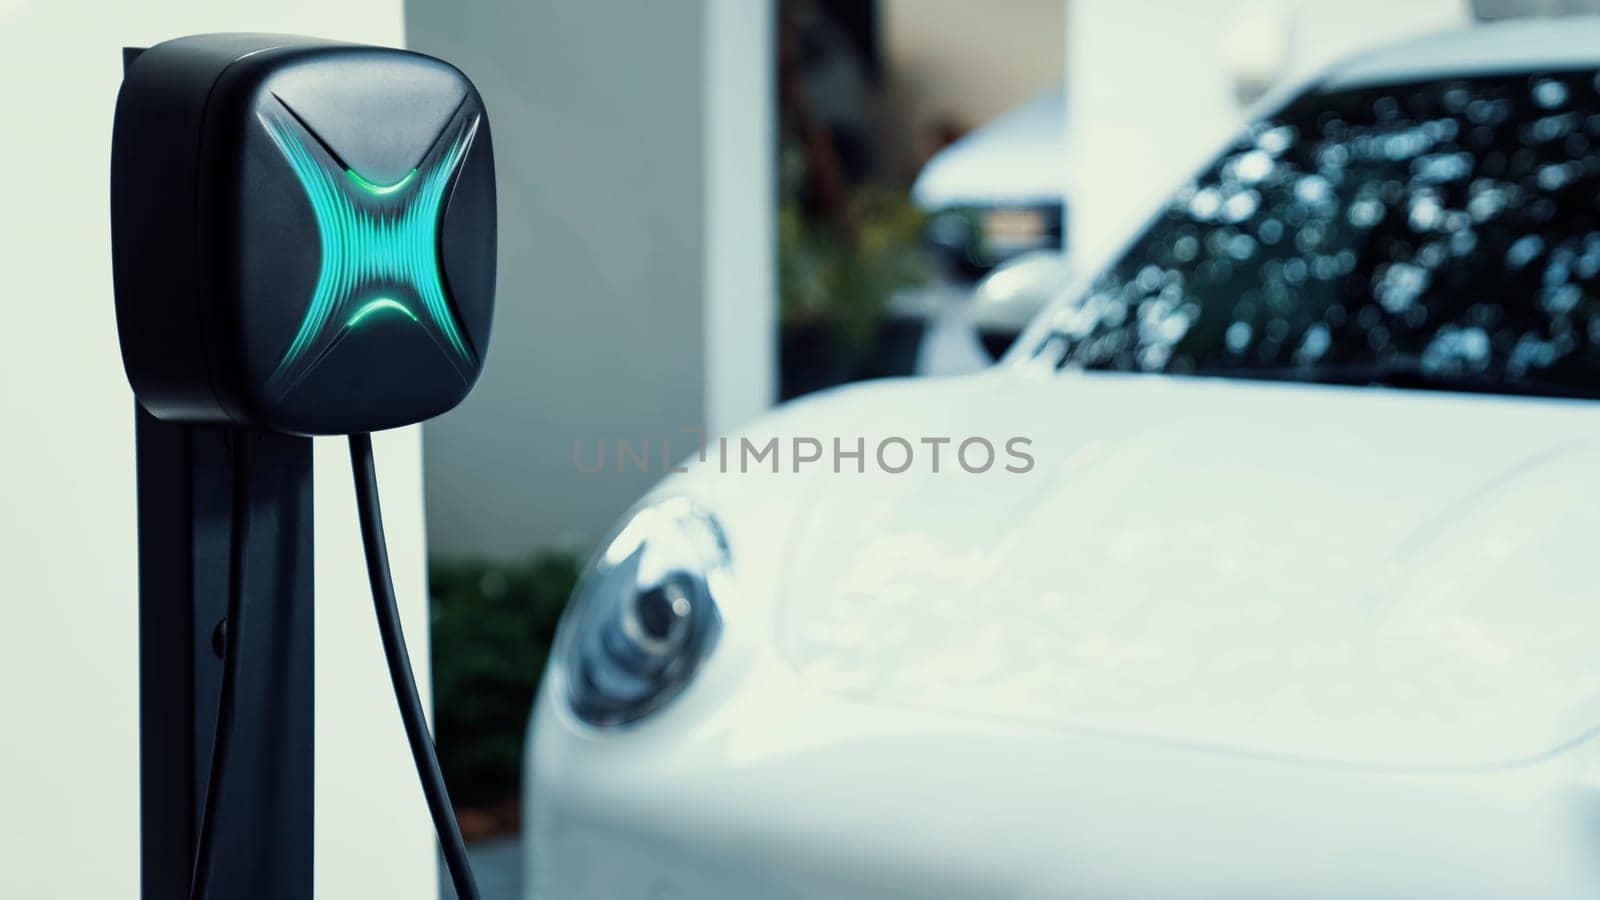 Electric car plugged in with home charging station. Peruse by biancoblue